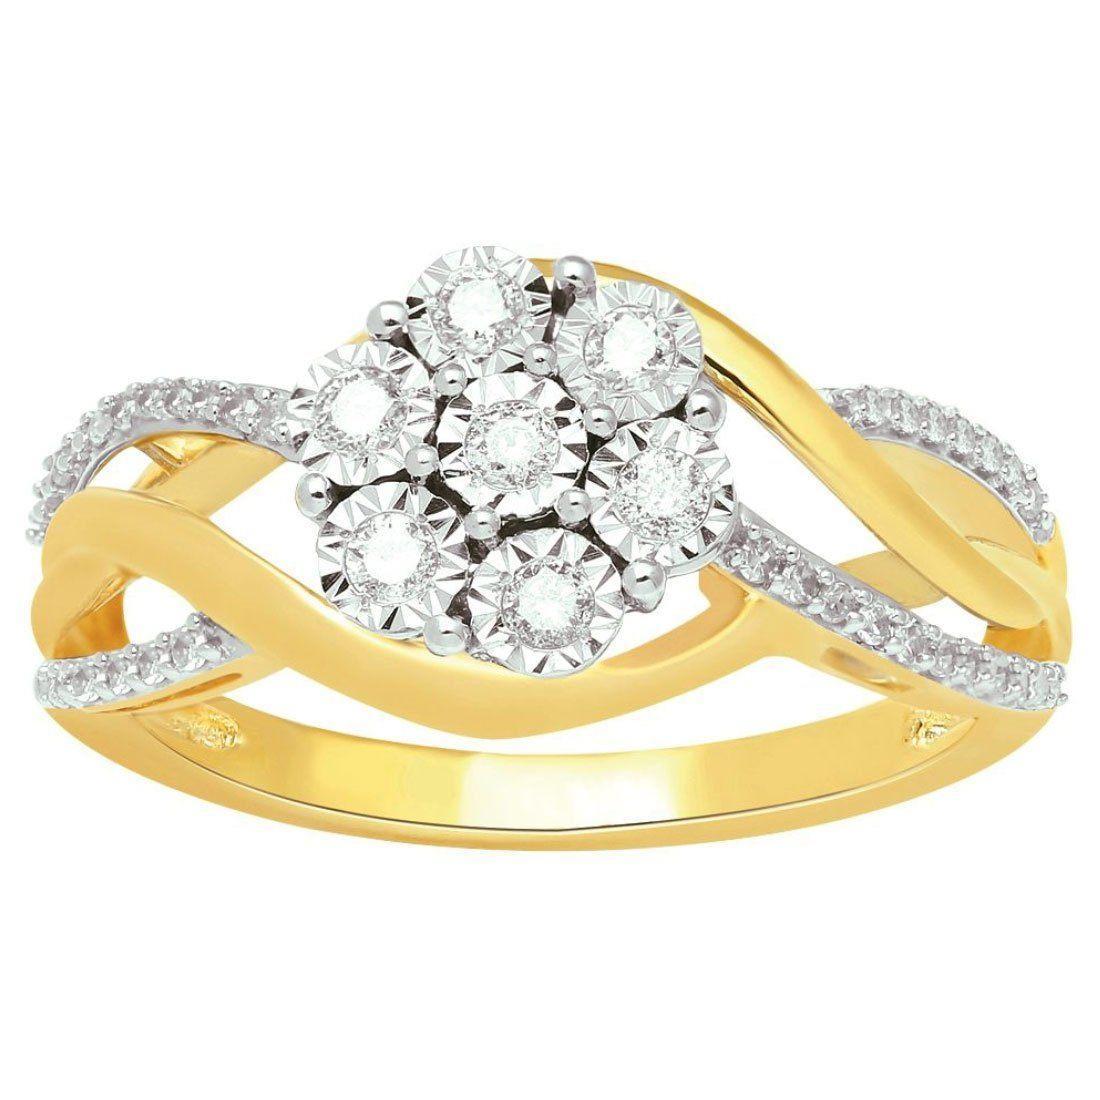 Bevilles Miracle Flower Ring with 1/4ct of Diamonds in 9ct Yellow Gold